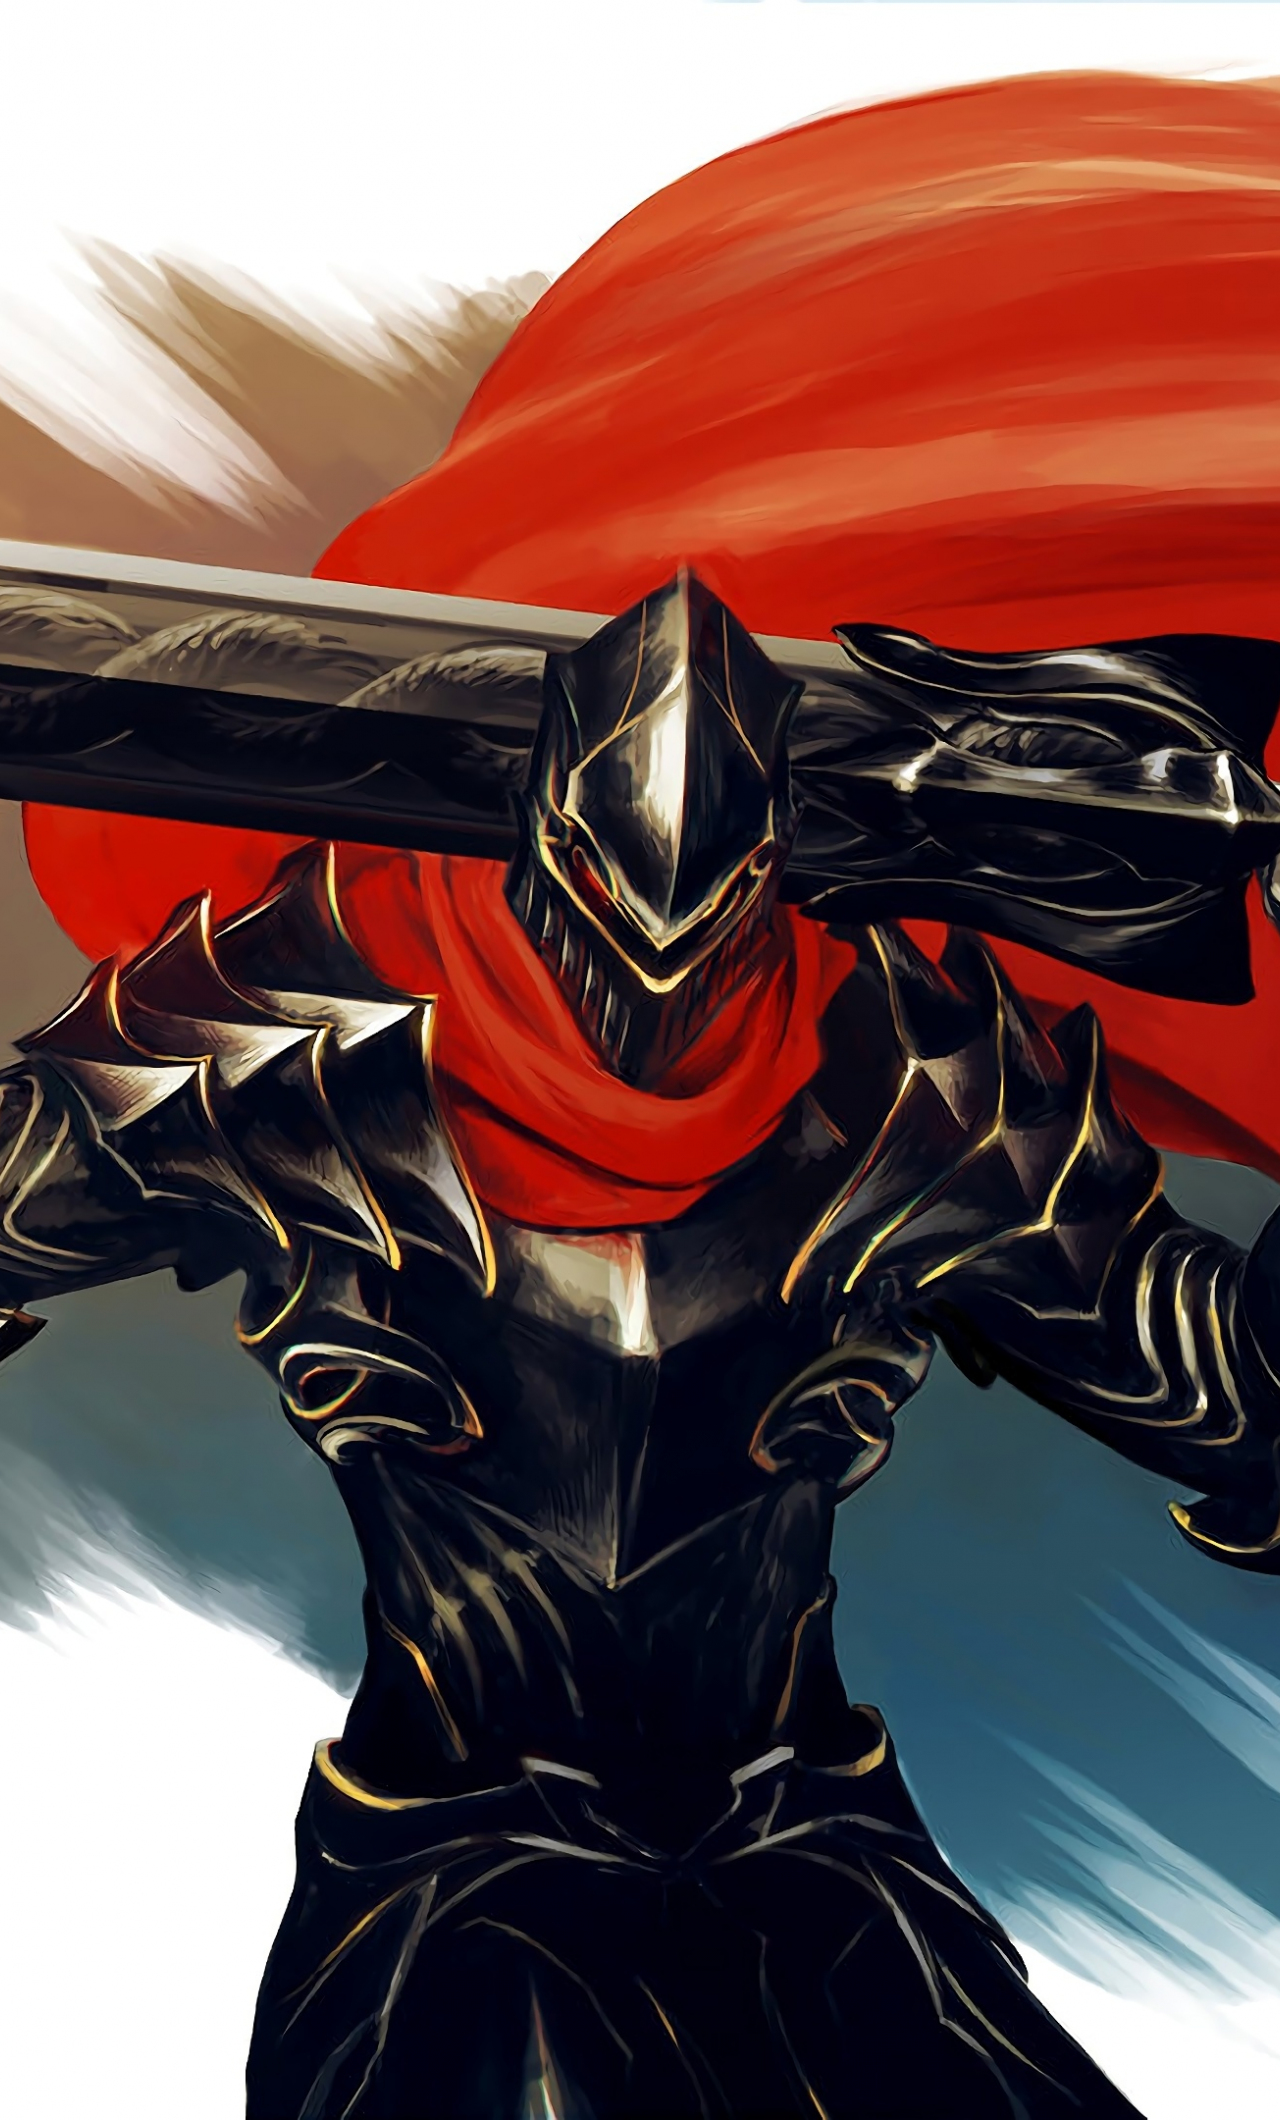 Download 1280x2120 Wallpaper Armour Big Sword Warrior Overlord Anime Art Iphone 6 Plus 1280x2120 Hd Image Background 10184